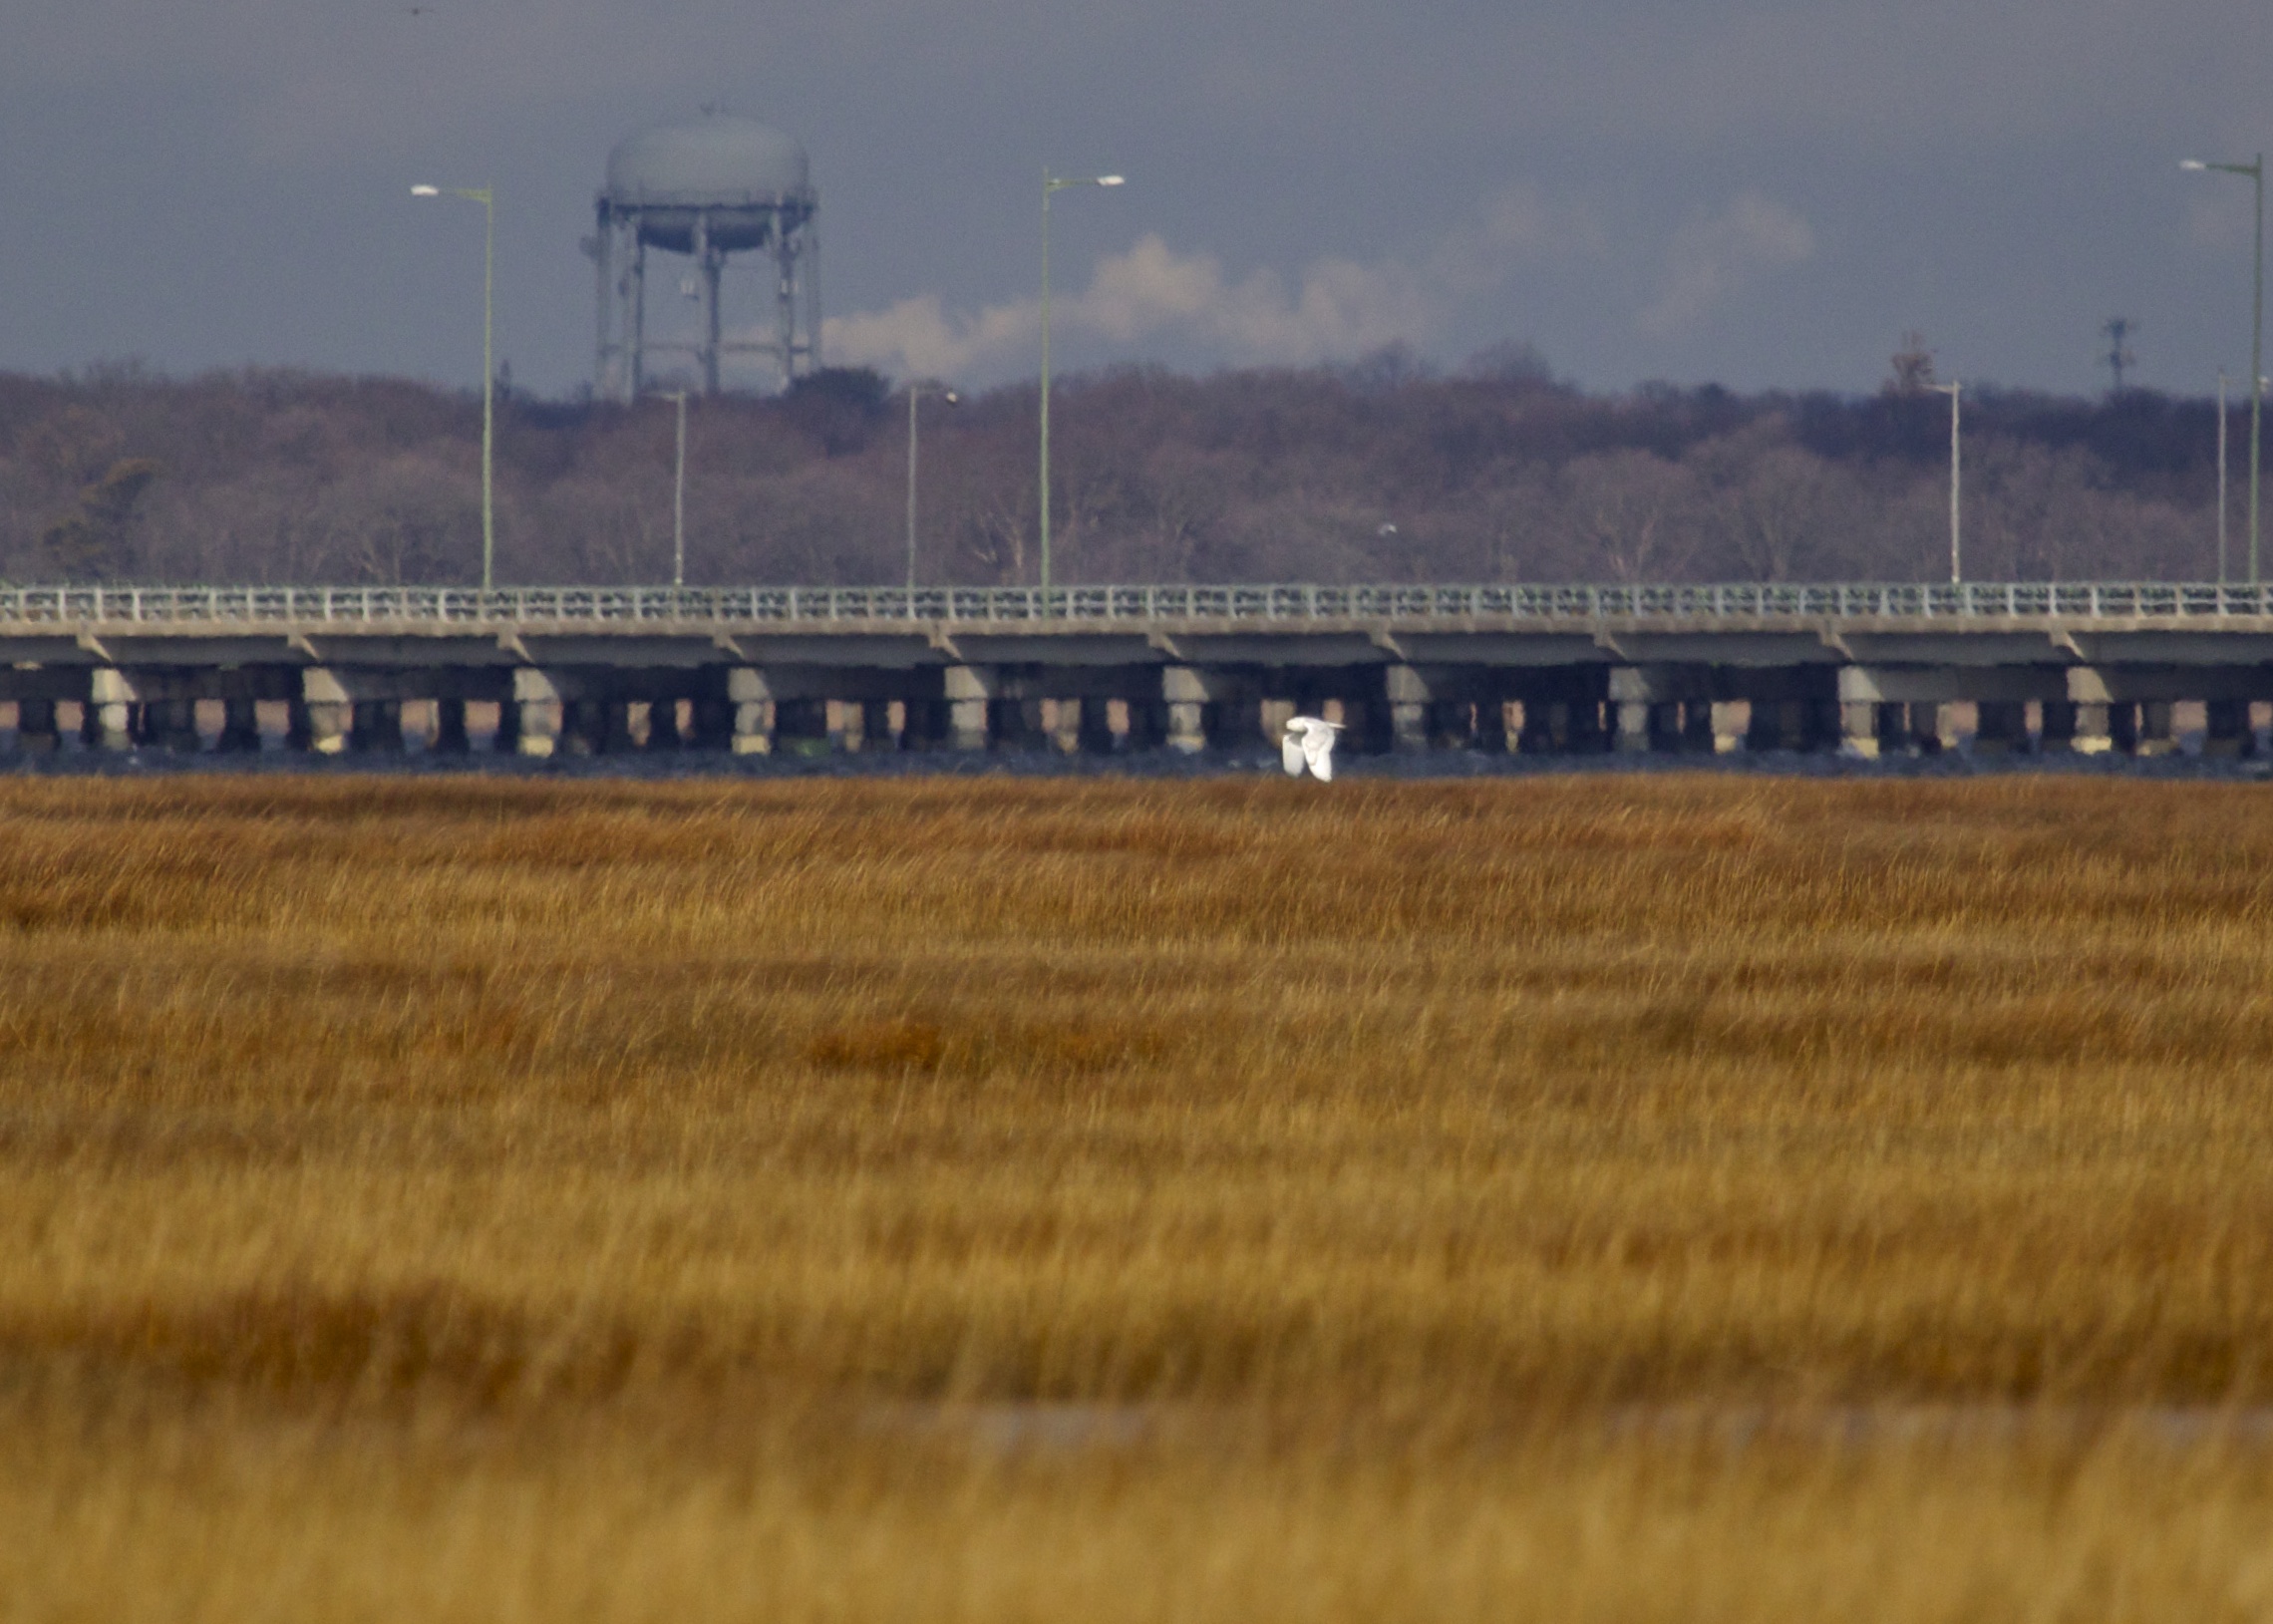 SNOWY OWL on Captree Island, 12/15/13. I can't get enough of the Snowies, this is my fourth!